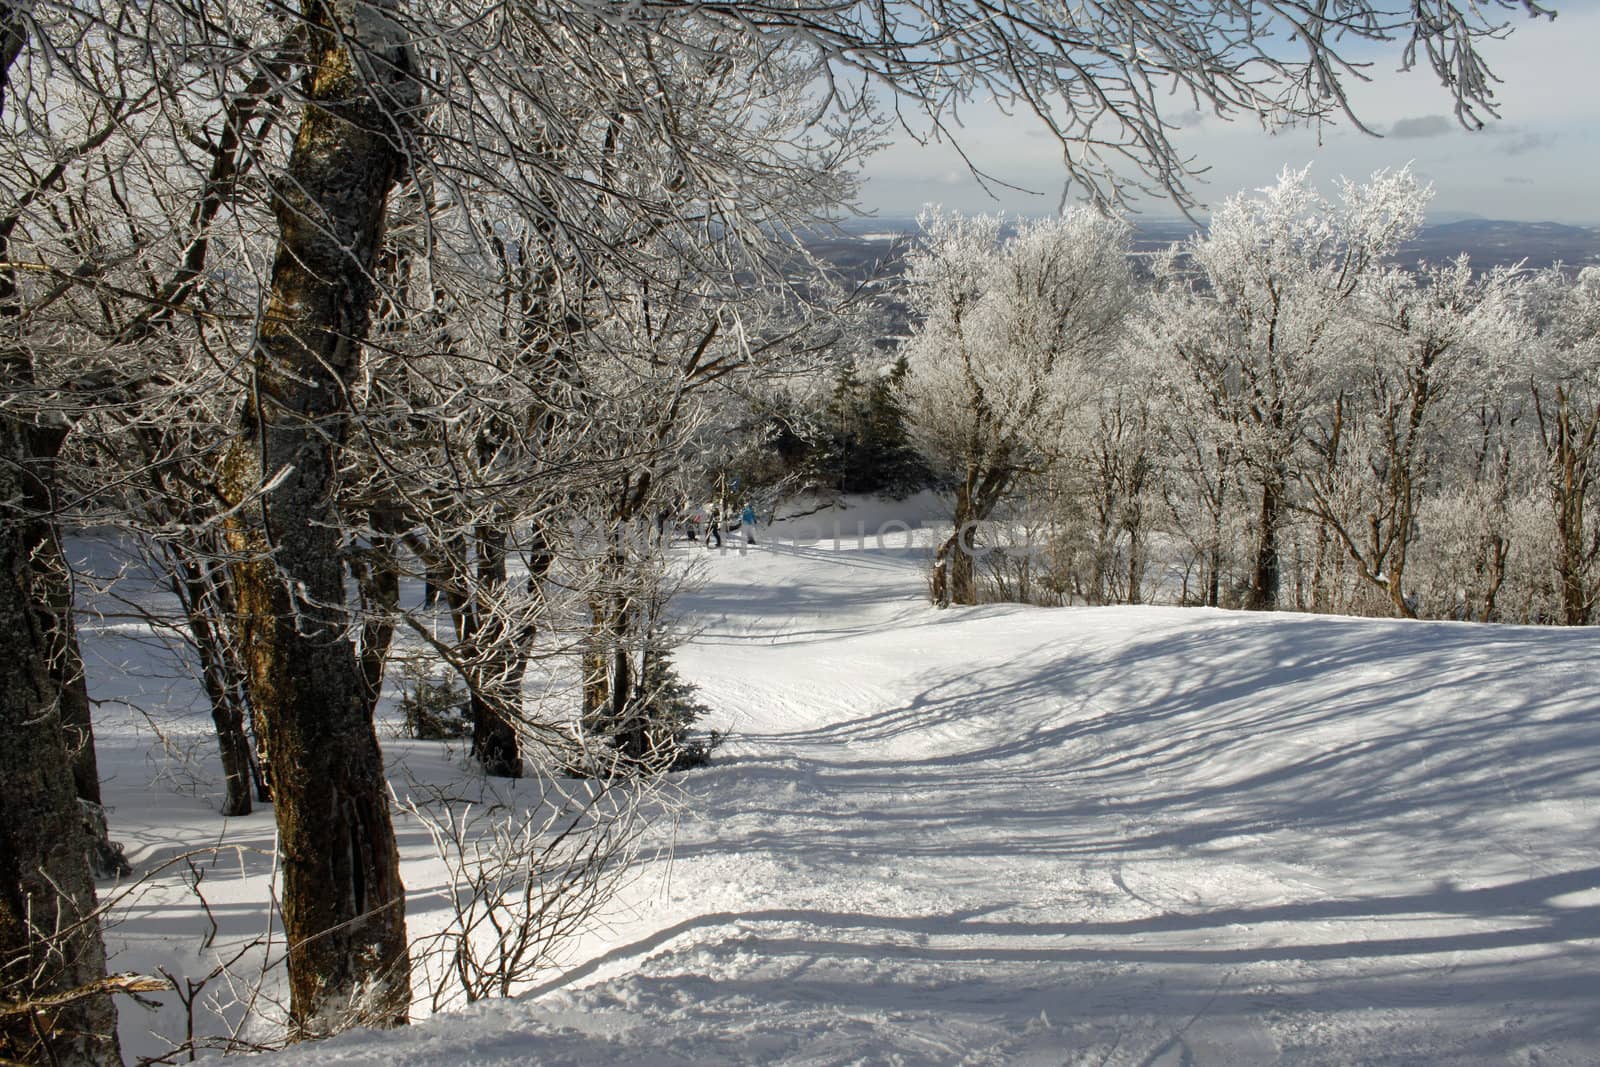 Calm winter ski slope with snow ladden tree tops